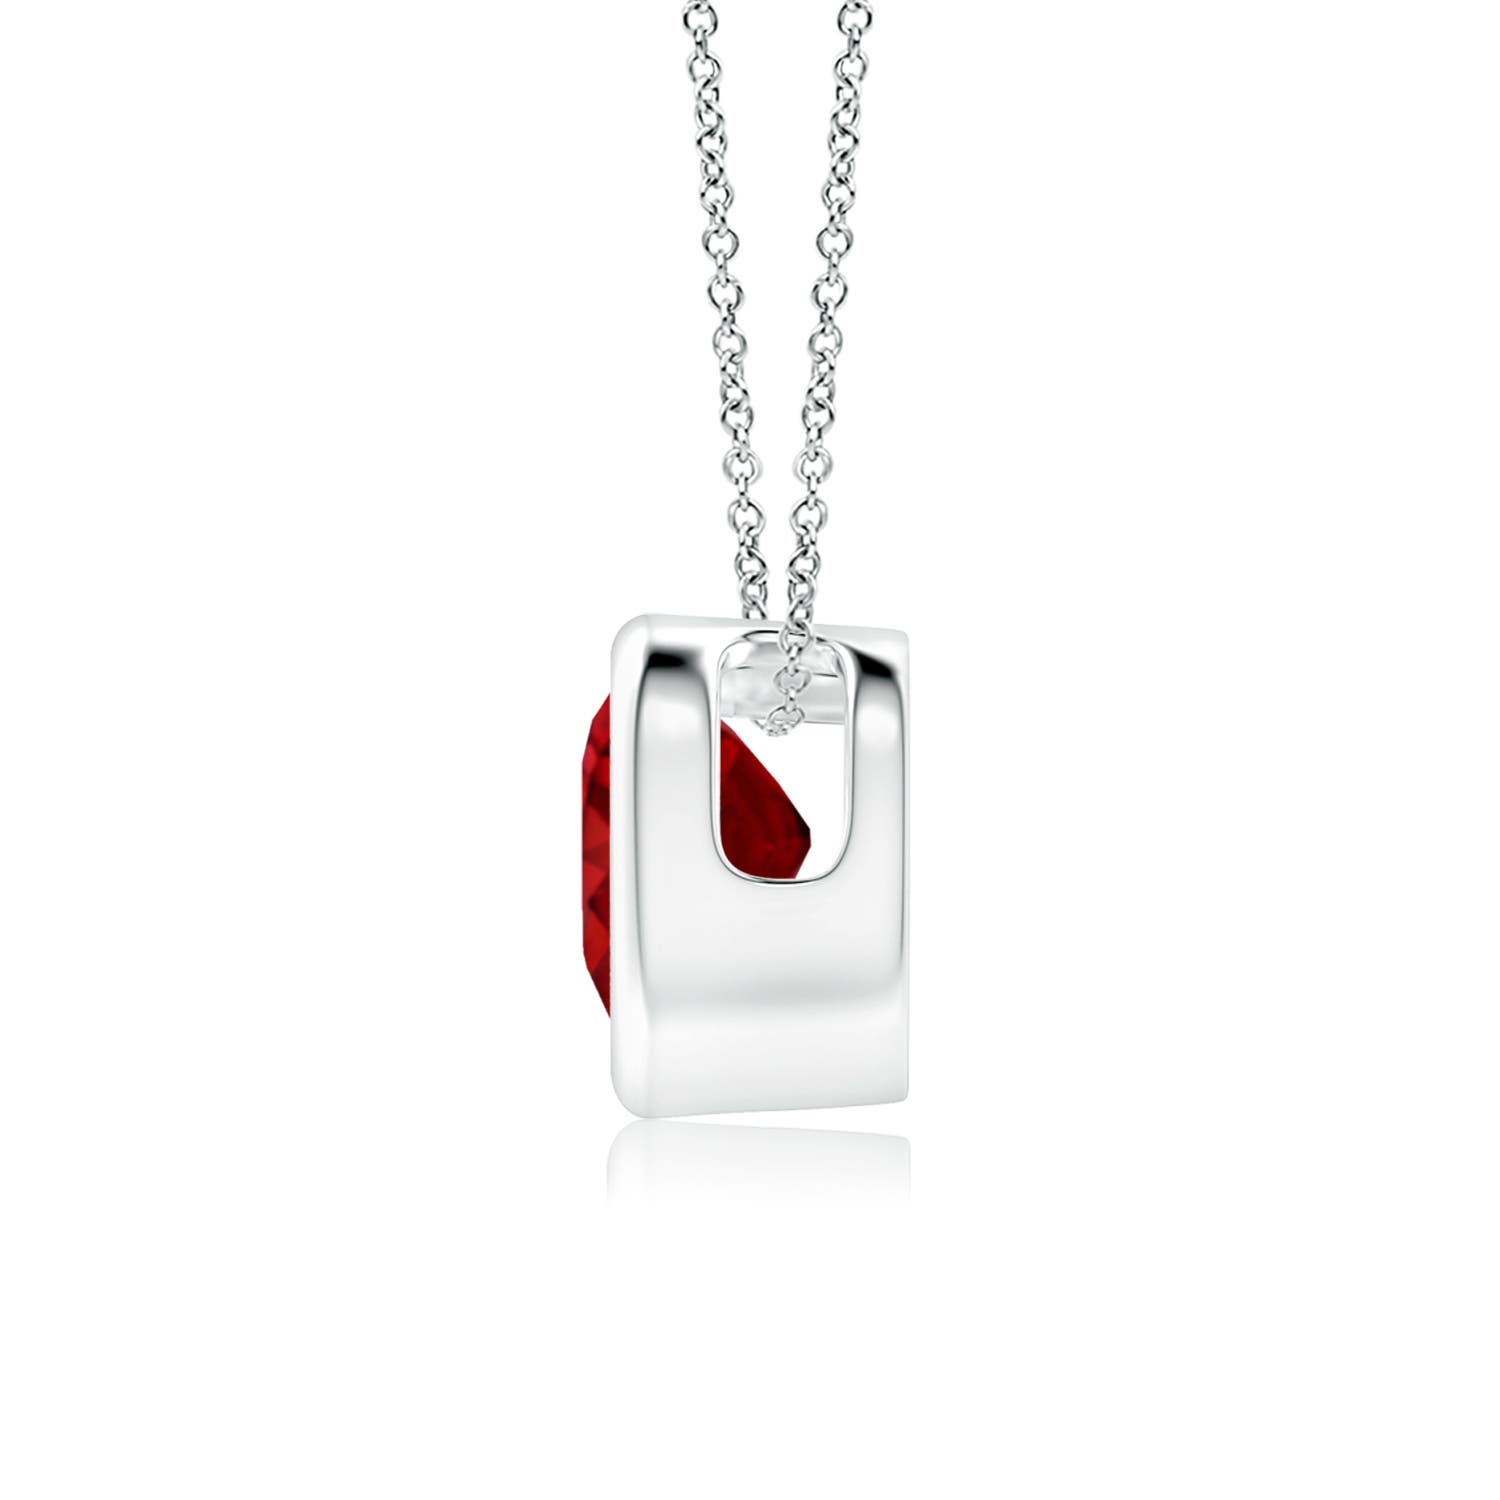 AAAA - Ruby / 0.55 CT / 14 KT White Gold